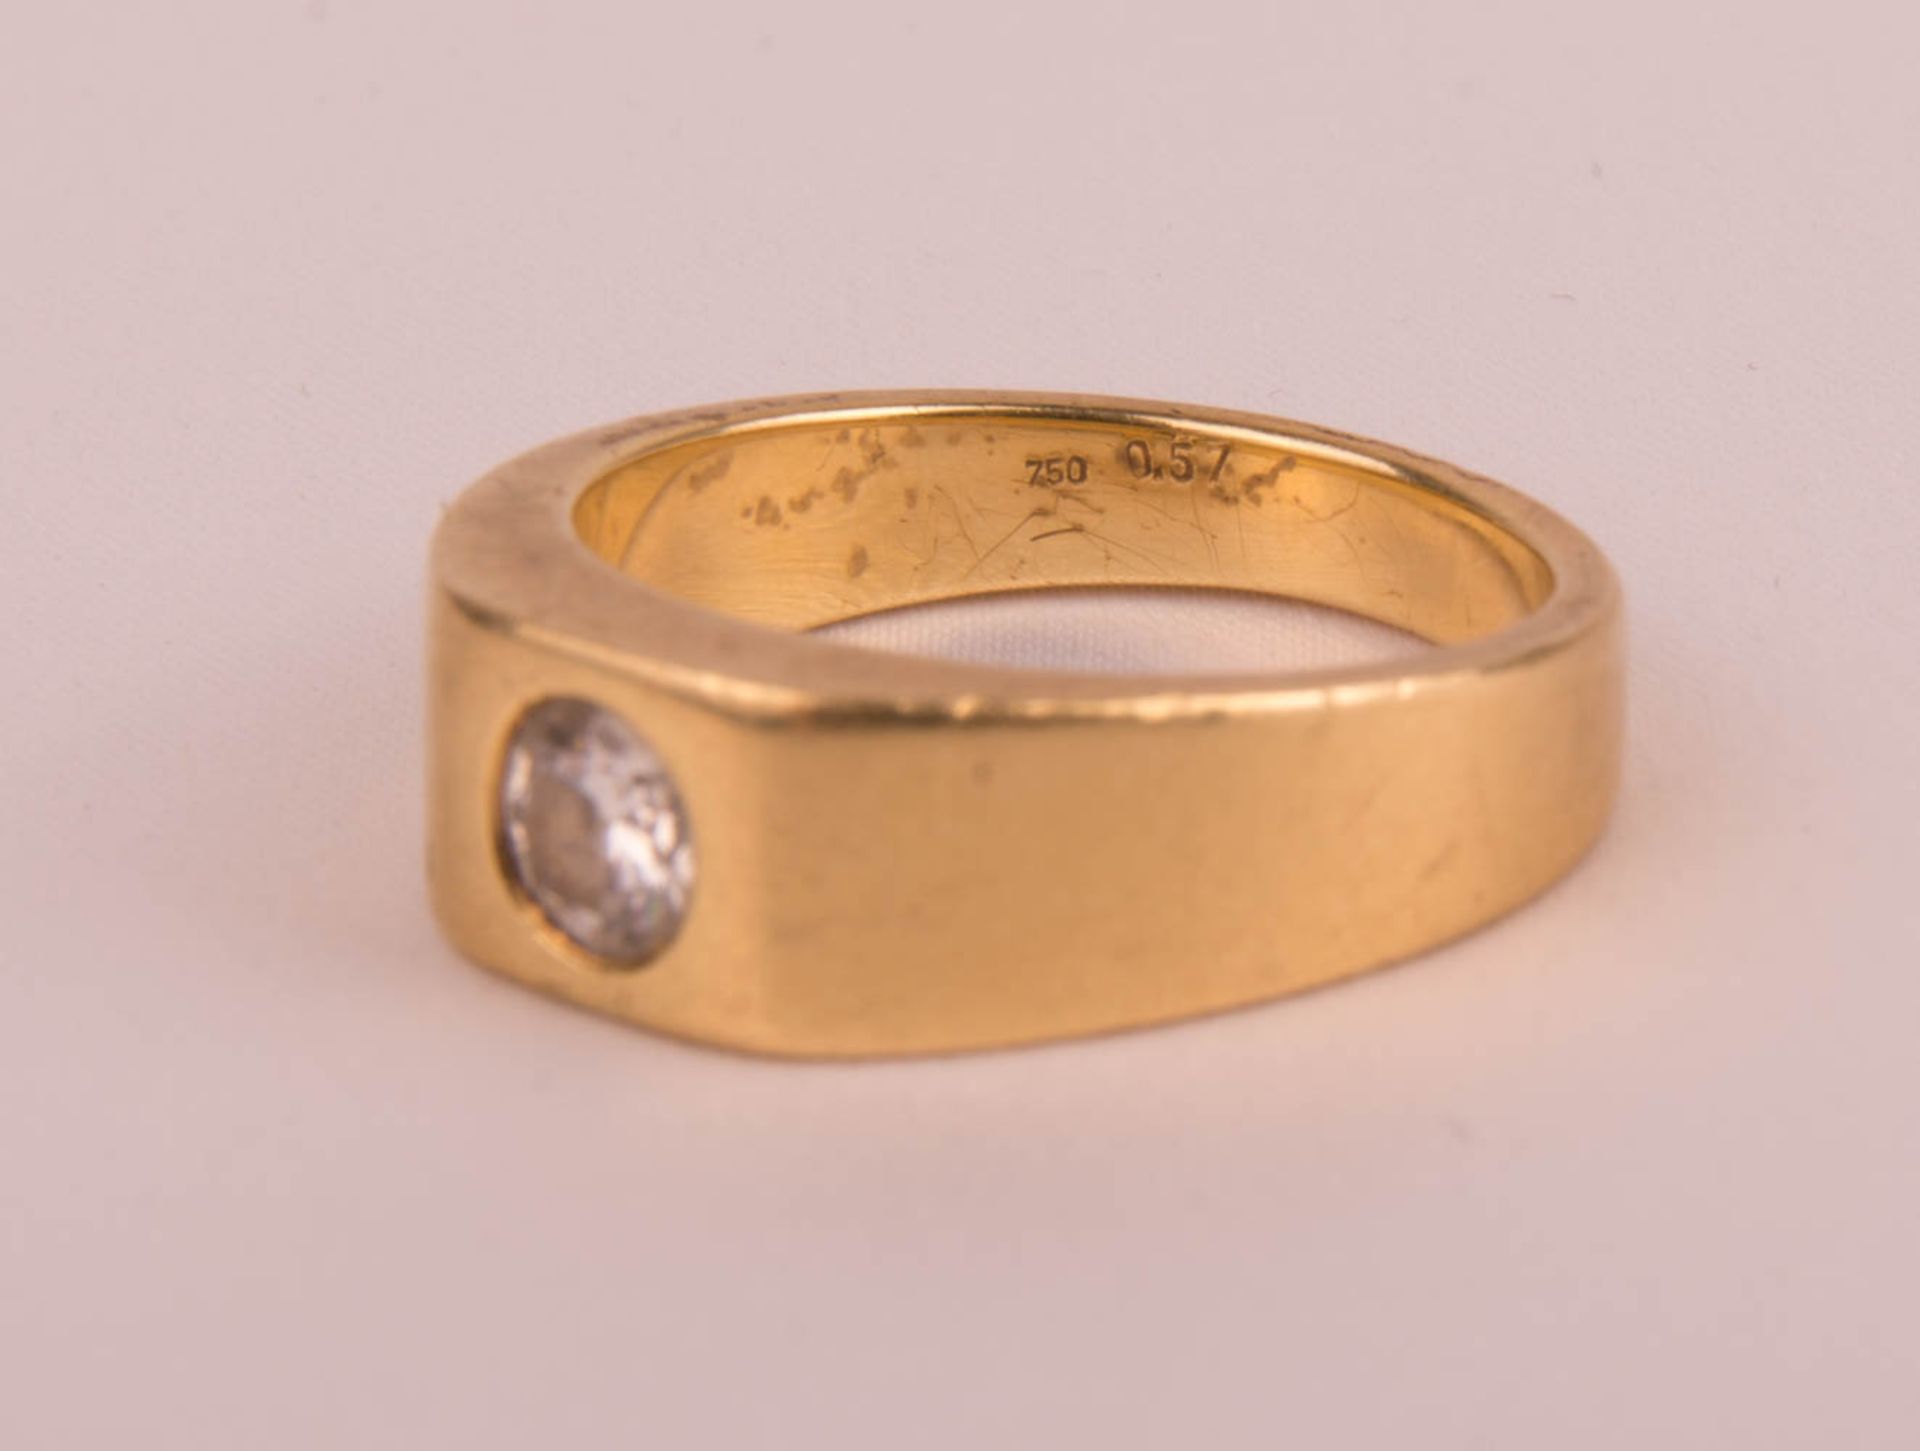 Men's ring with diamond, 750 yellow gold. - Image 4 of 4